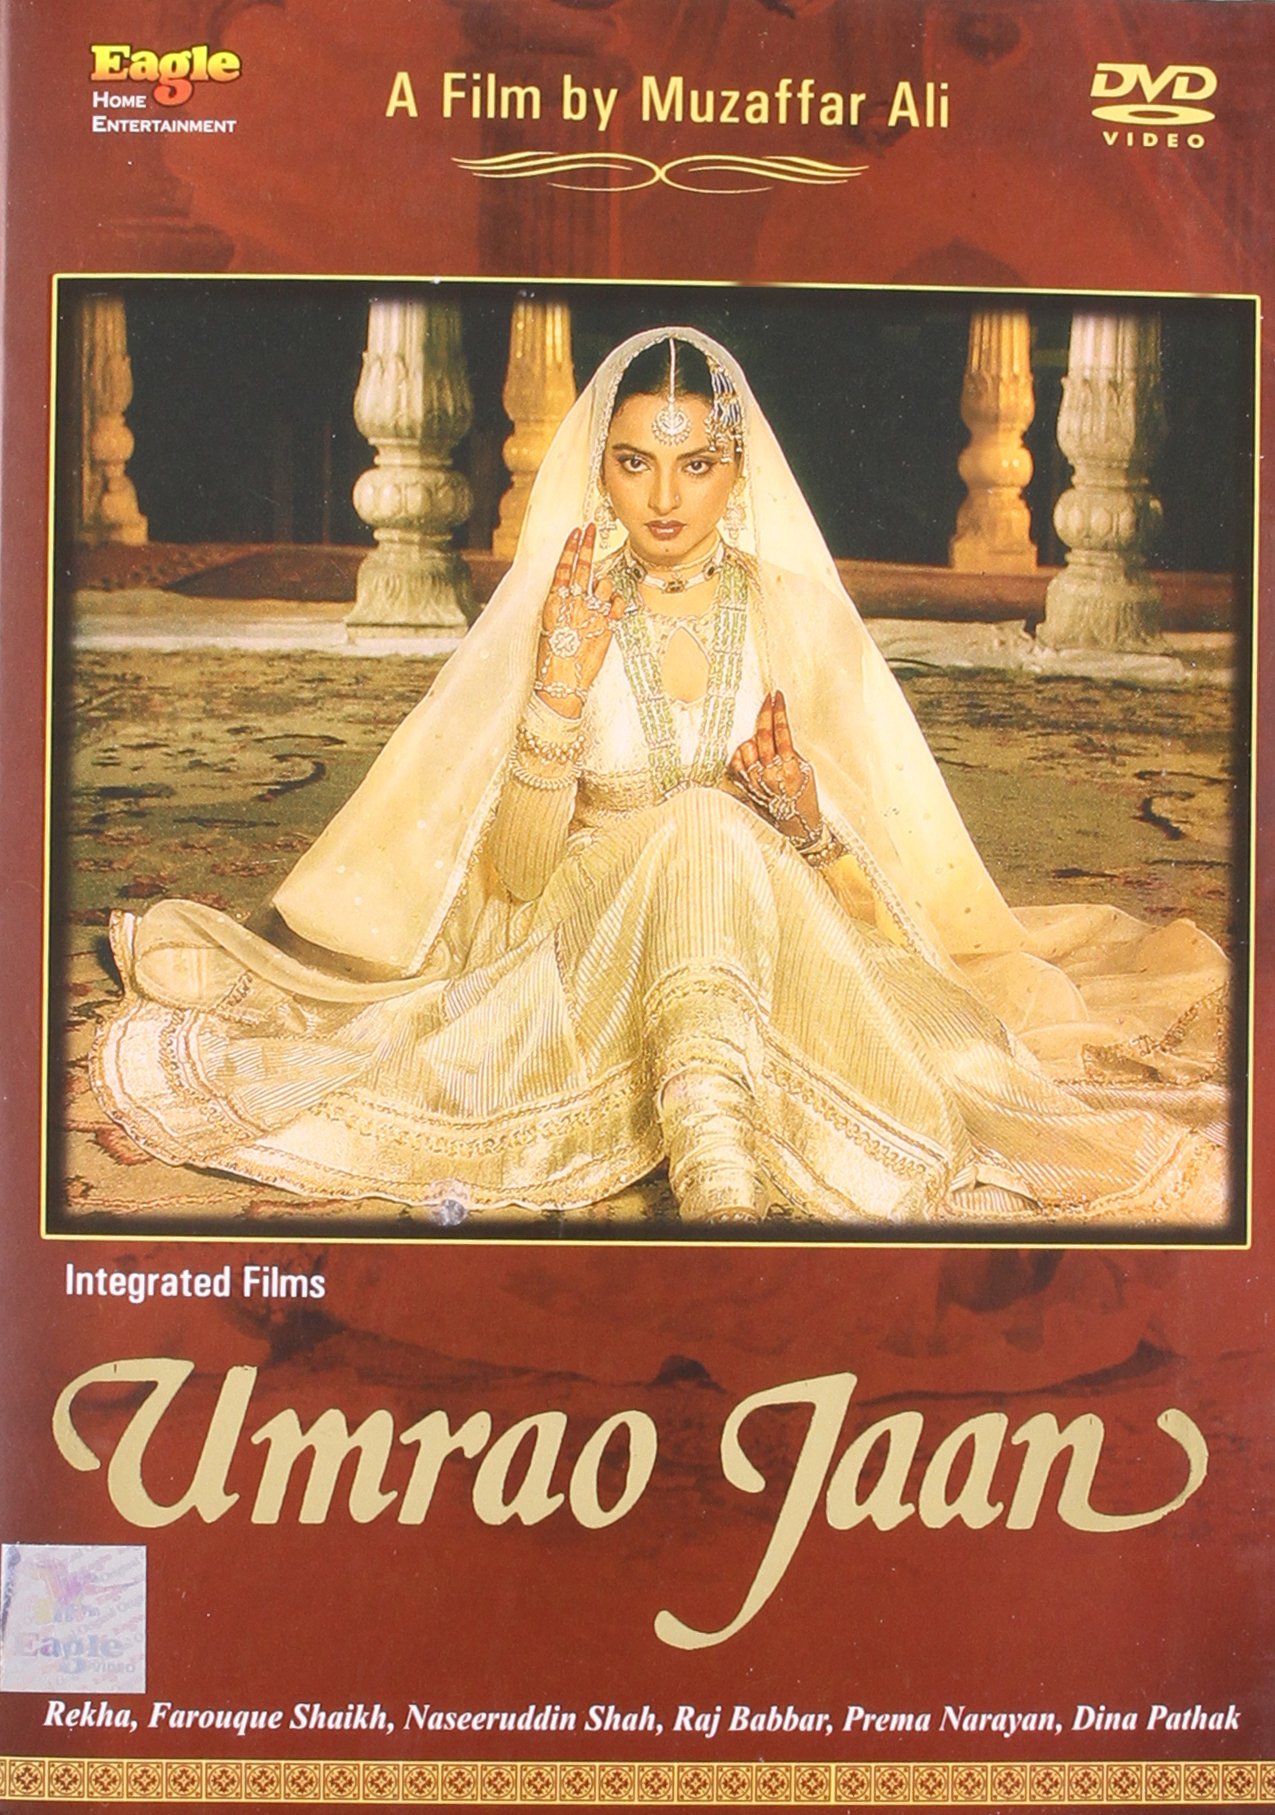 umrao-jaan-movie-purchase-or-watch-online